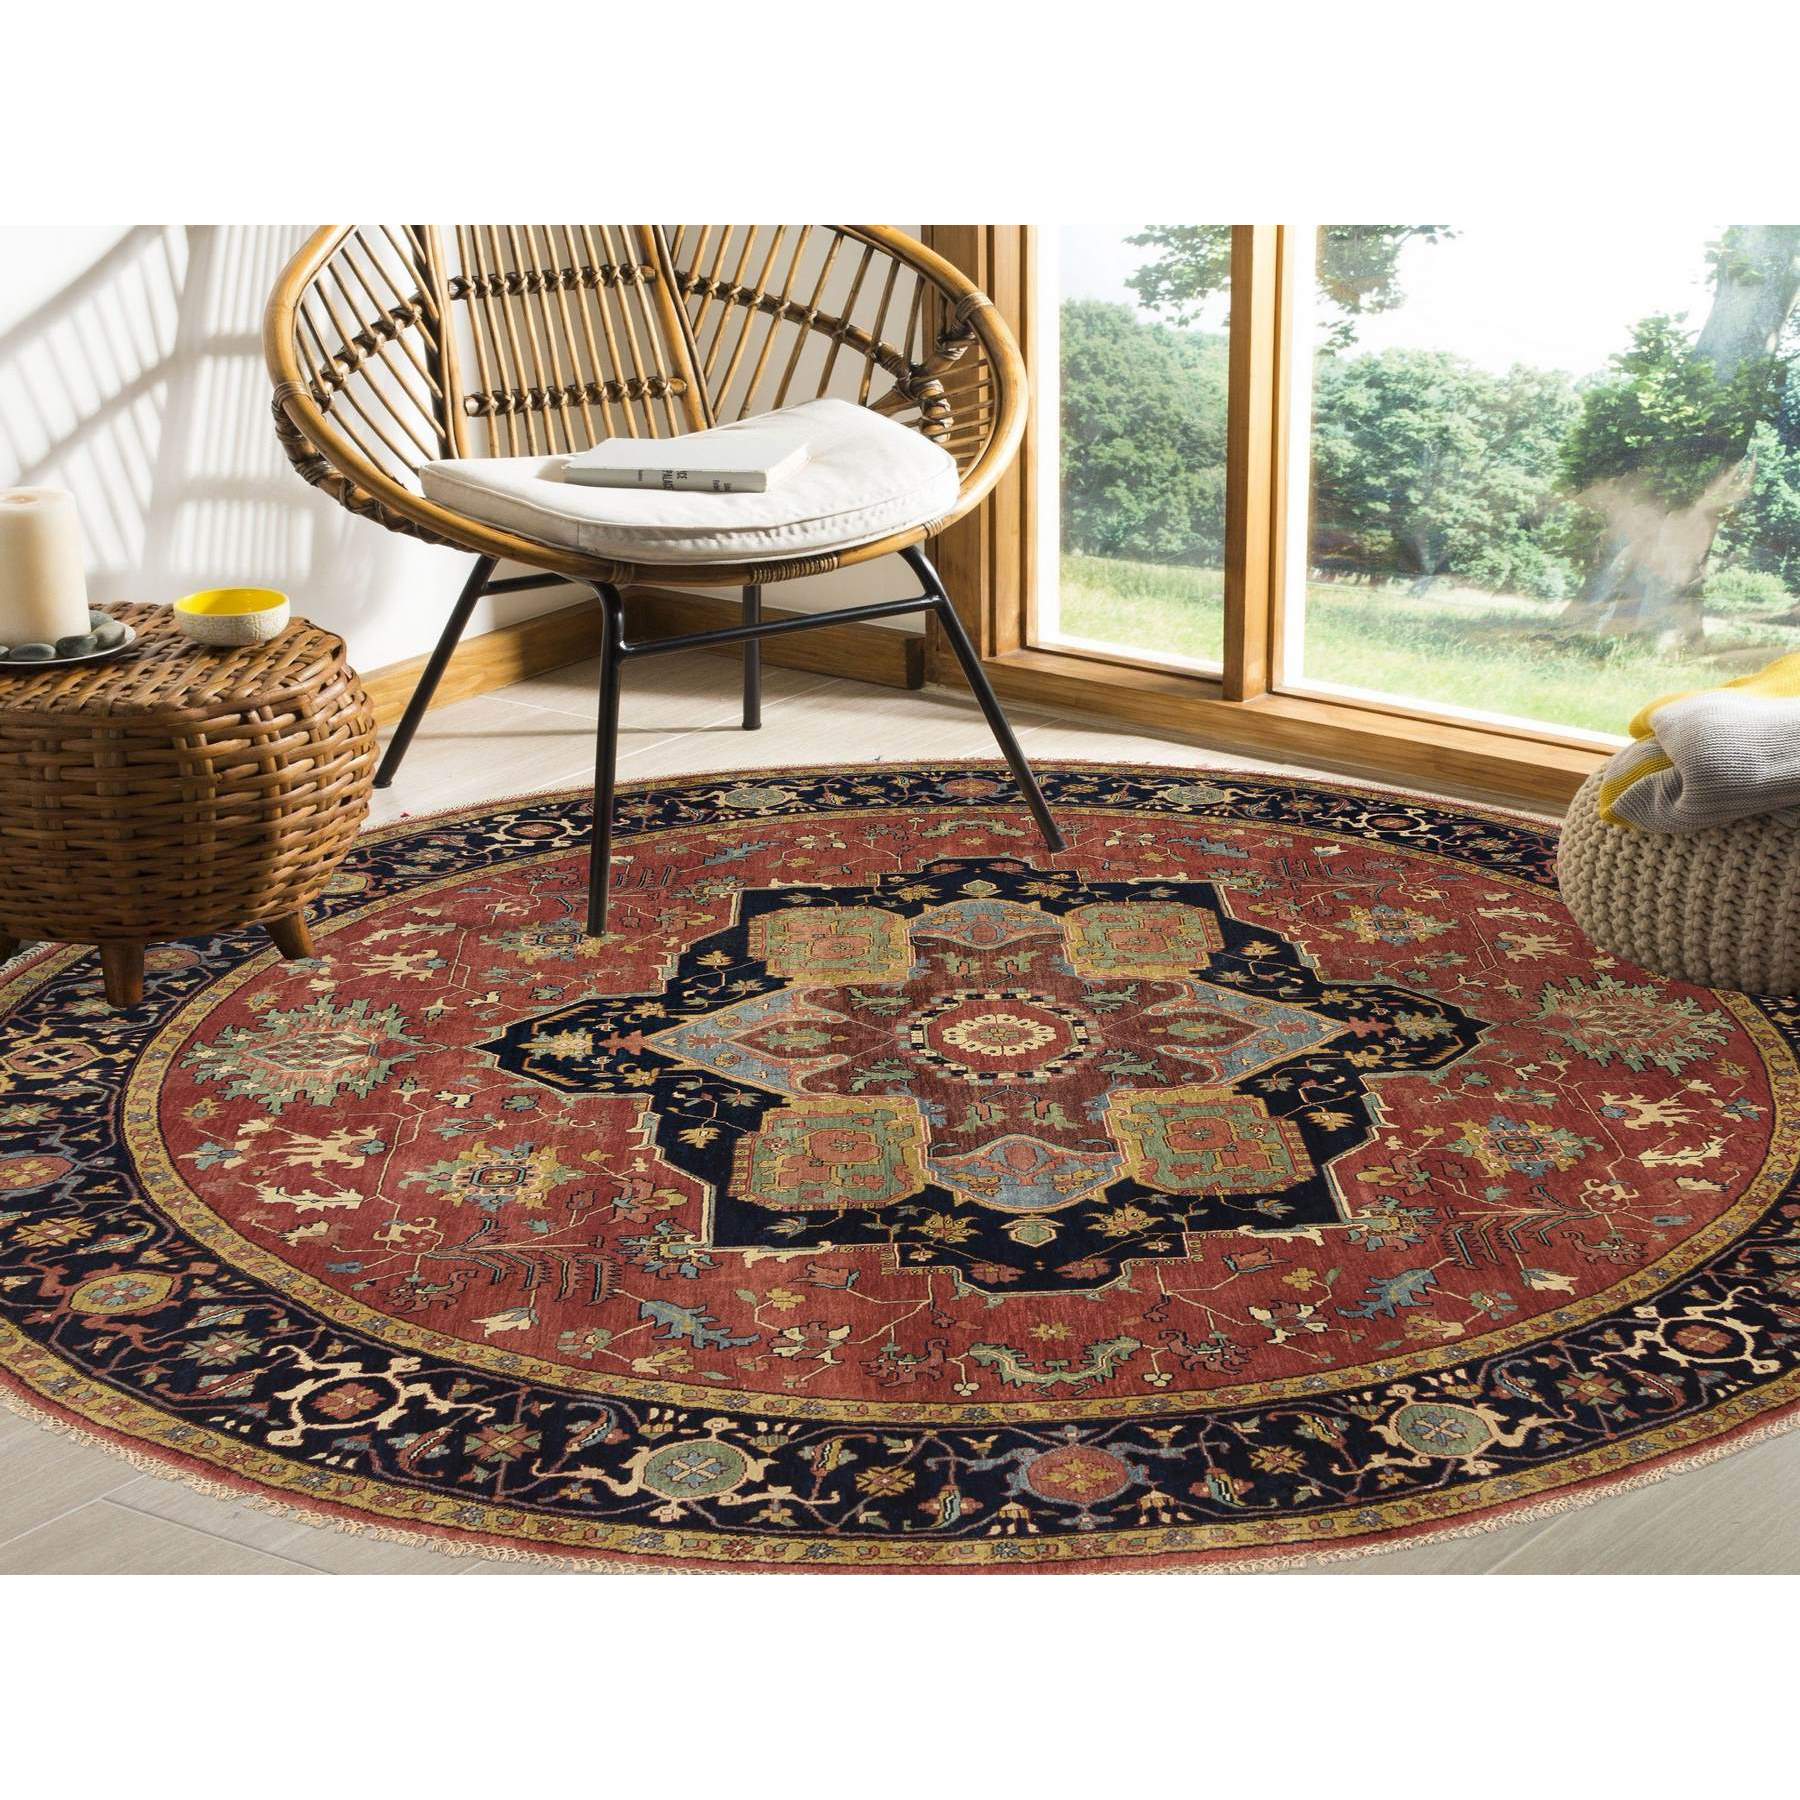 10'x10' Terracotta Red, Natural Dyes Hand Spun Wool Hand Woven, Antiqued Fine Heriz Re-Creation Densely Woven, Round Oriental Rug 